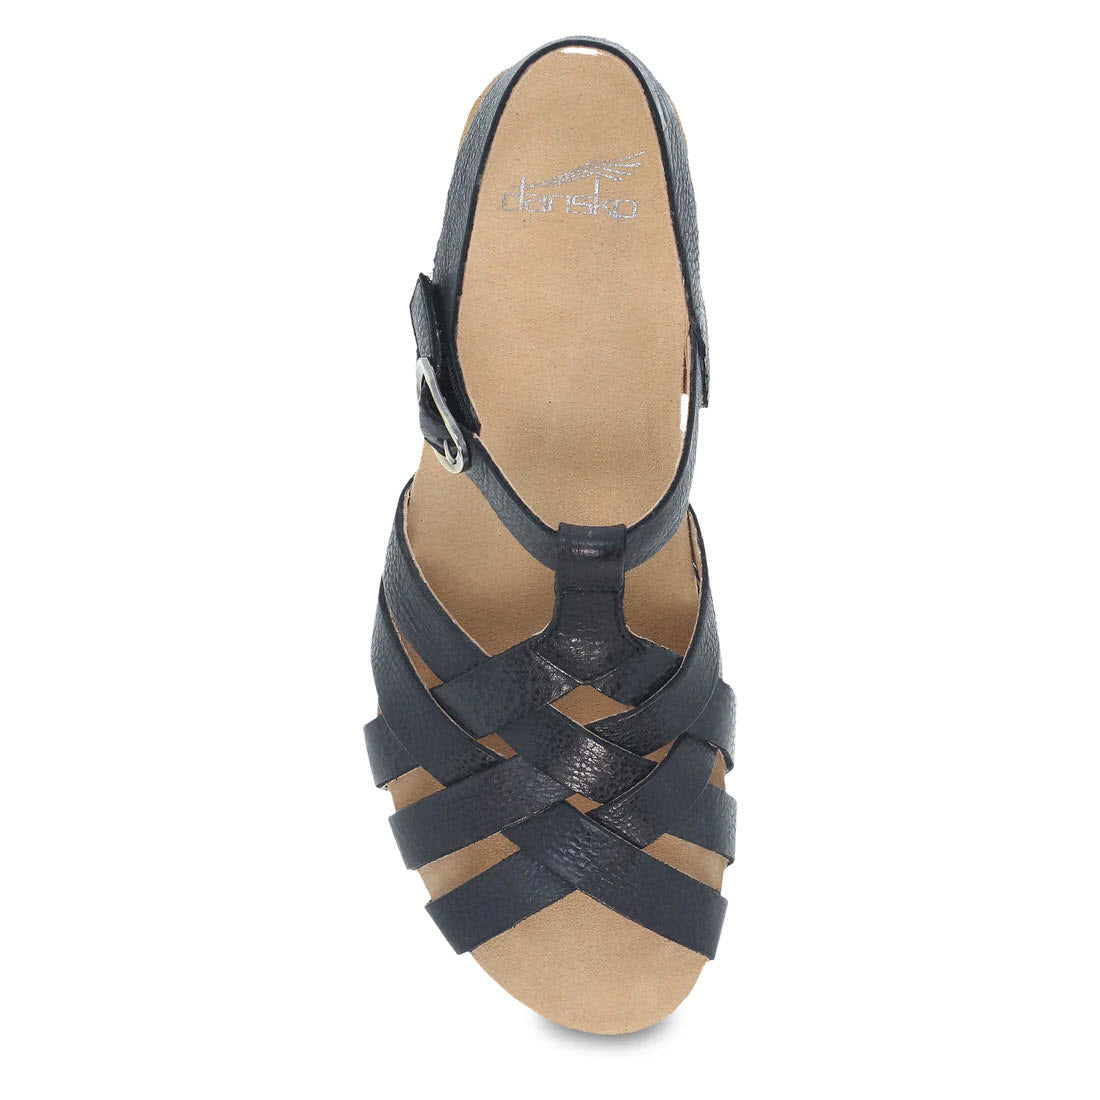 Top view of a Dansko Tinley Black sandal with a small heel and an ankle strap, featuring woven leather uppers, displayed on a white background.